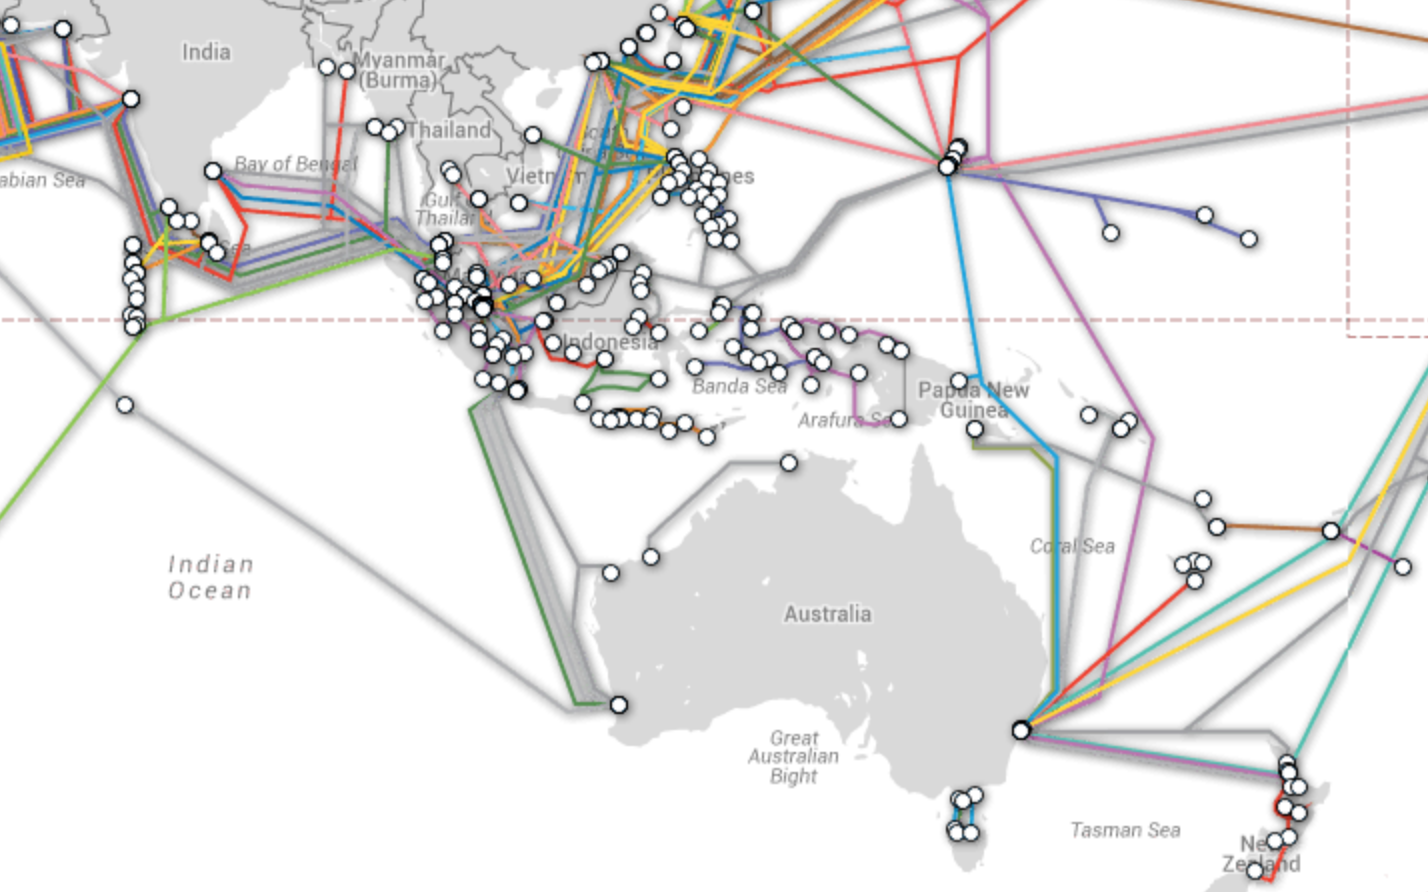 connectivity network across the globe. Image source: Reddit